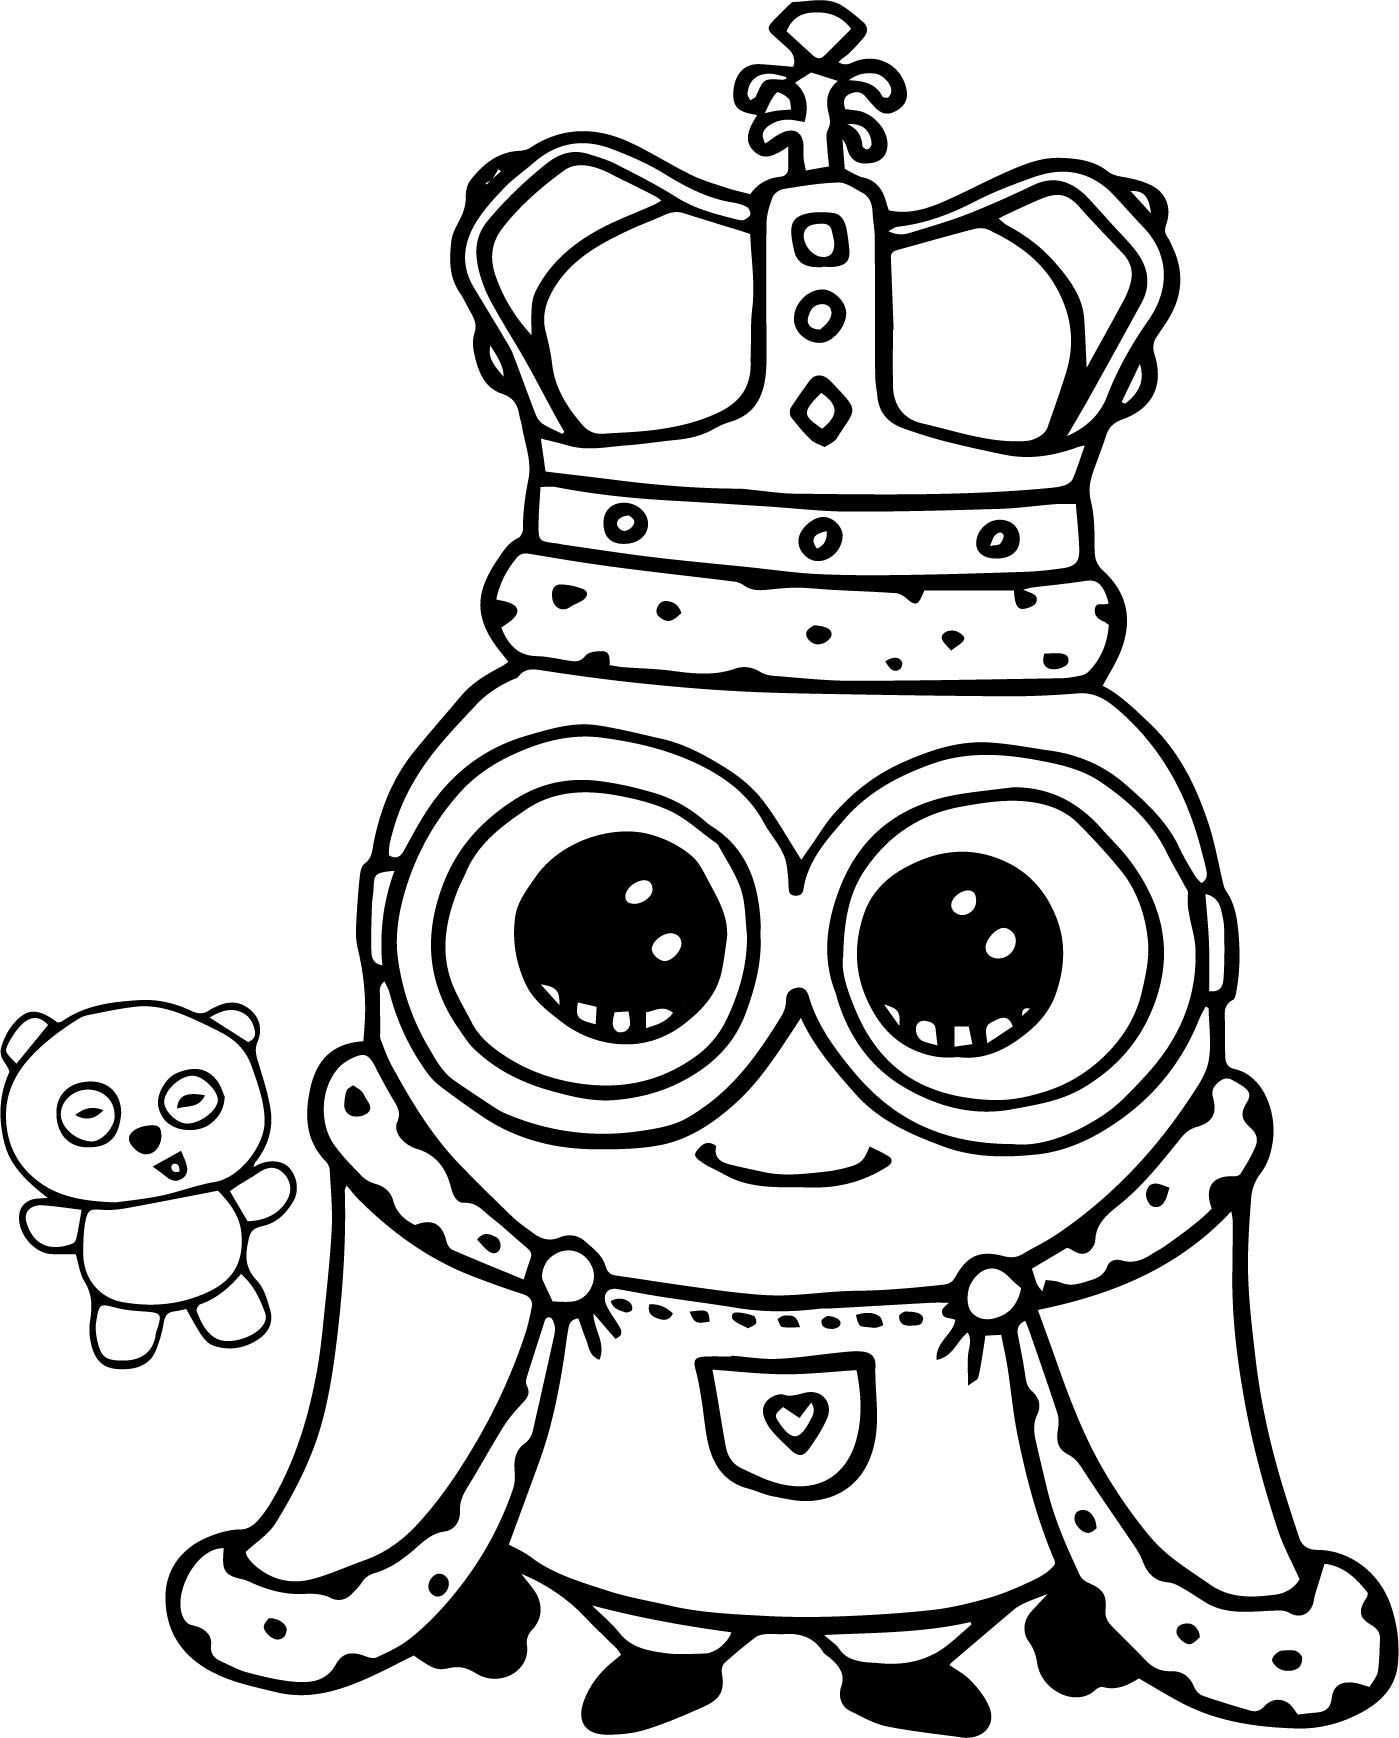 Nice Minion King Bob Cute Coloring Page Minion Coloring Pages Cute Coloring Pages Minions Coloring Pages